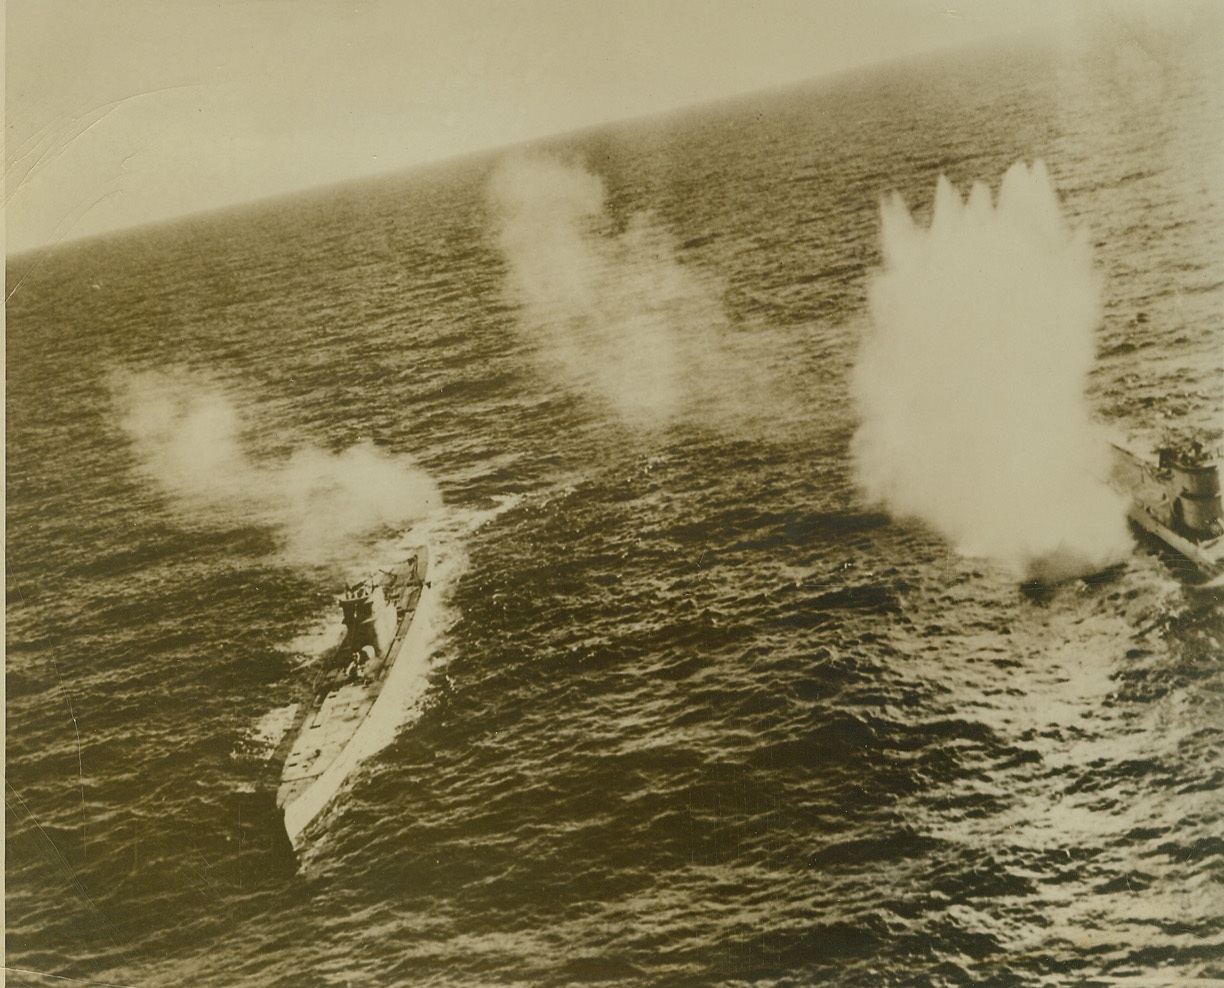 Caught in the Act, 10/22/1943. Apparently just about to attempt a refueling at sea, these two Nazi subs were surprised by depth bombs from a Grumman Avenger torpedo bomber. Attacking both subs single-handed, the pilot planted a depth charge which raises a plume of spray at right. The refueler was believed to be the U-boat at left. Credit: (Official US Navy Photo from ACME);